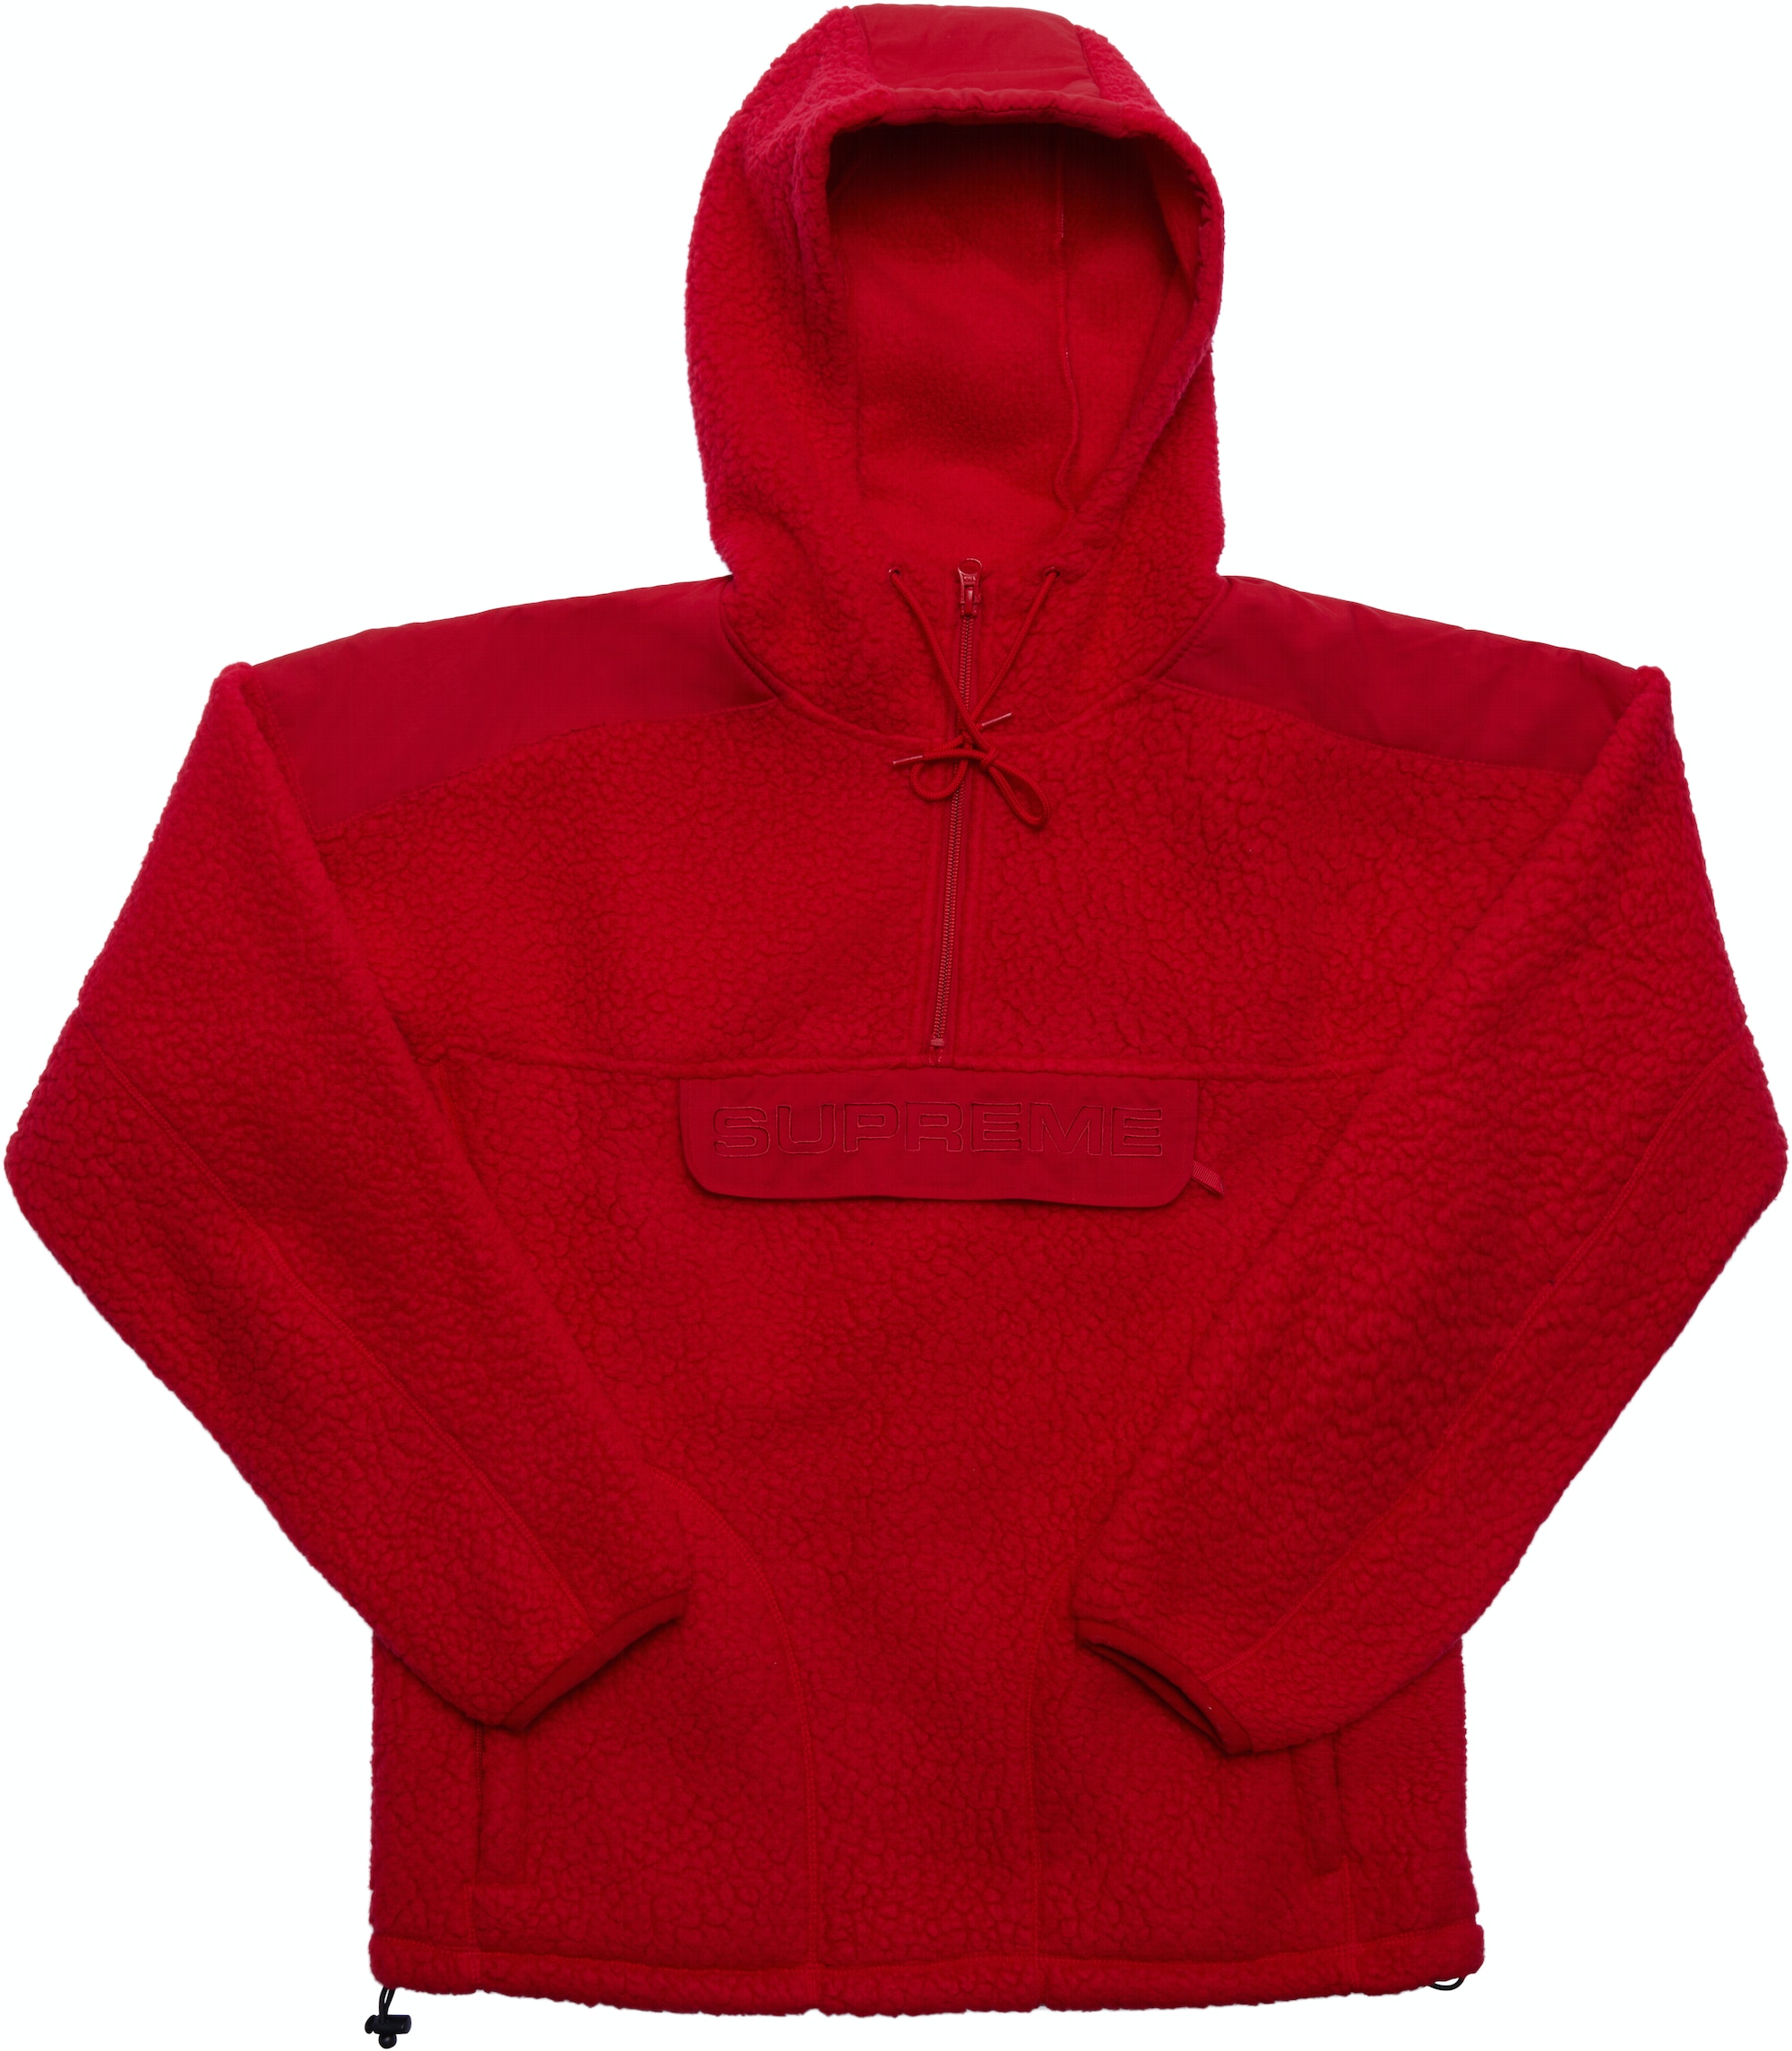 Supreme Polartec Hooded Half Zip Pullover Red - FW17